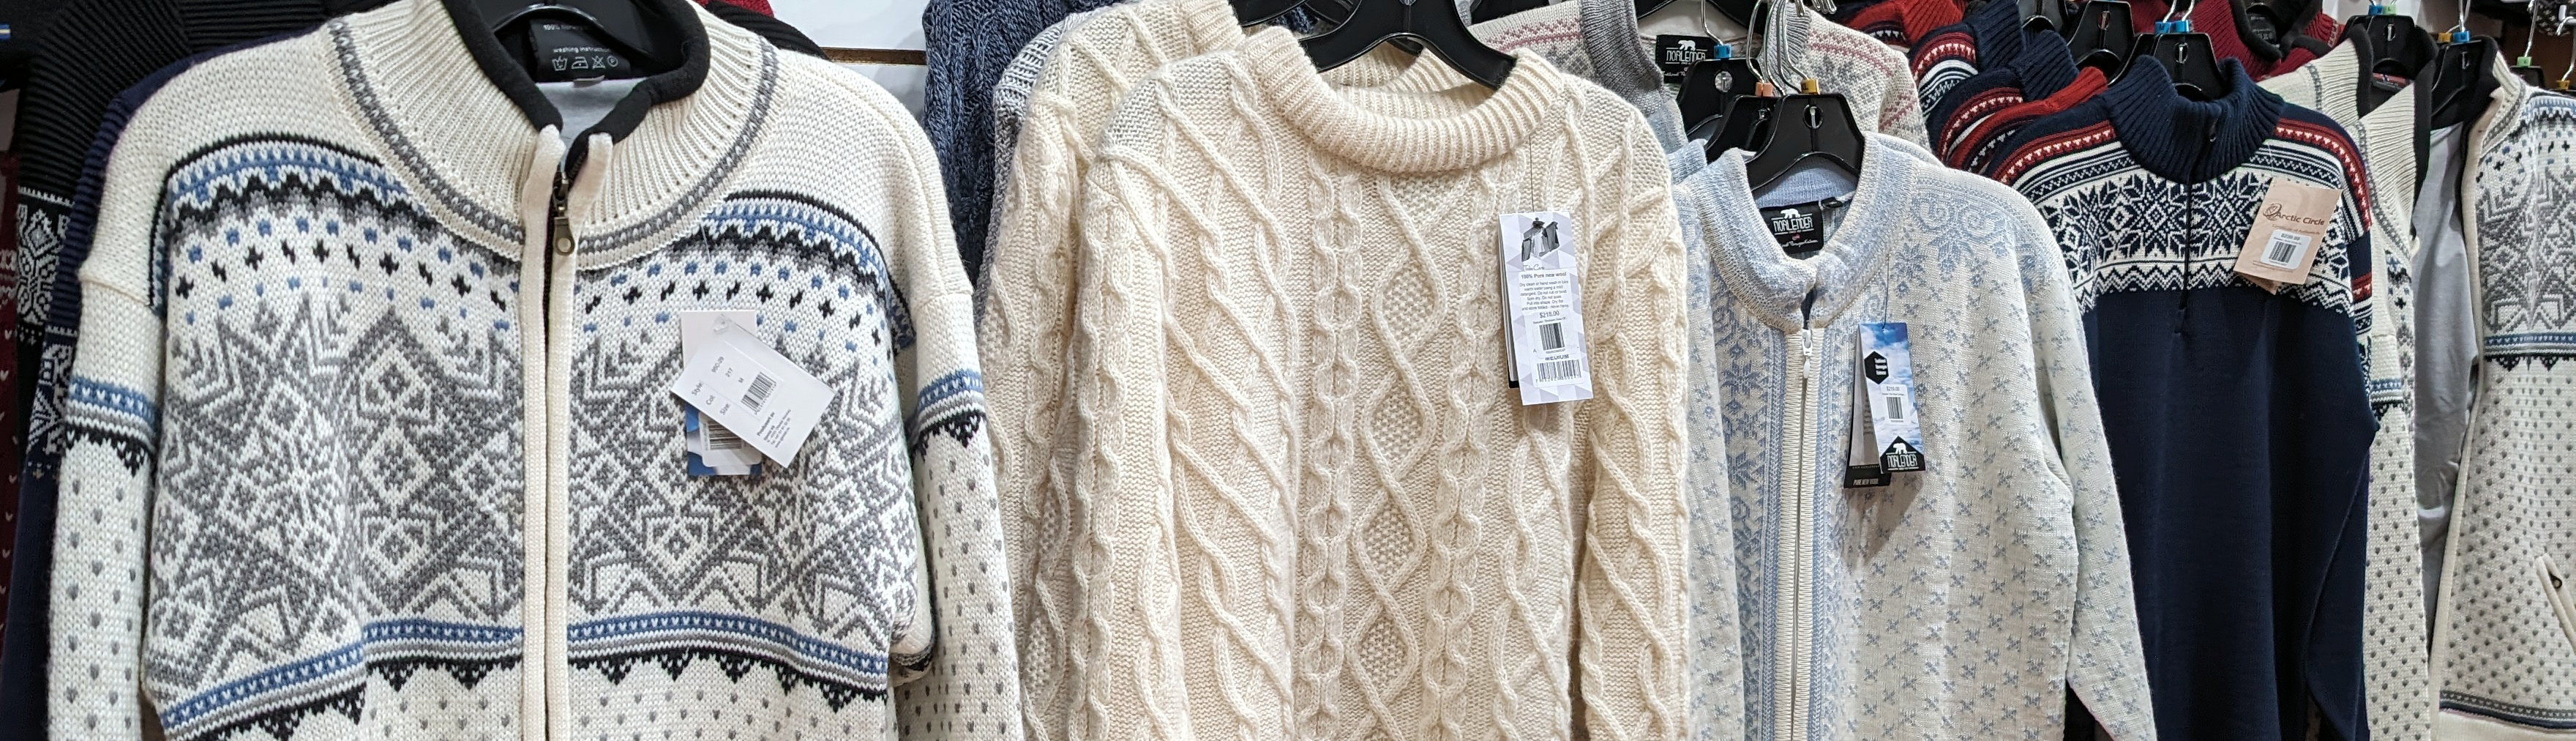 Clothing: Sweaters